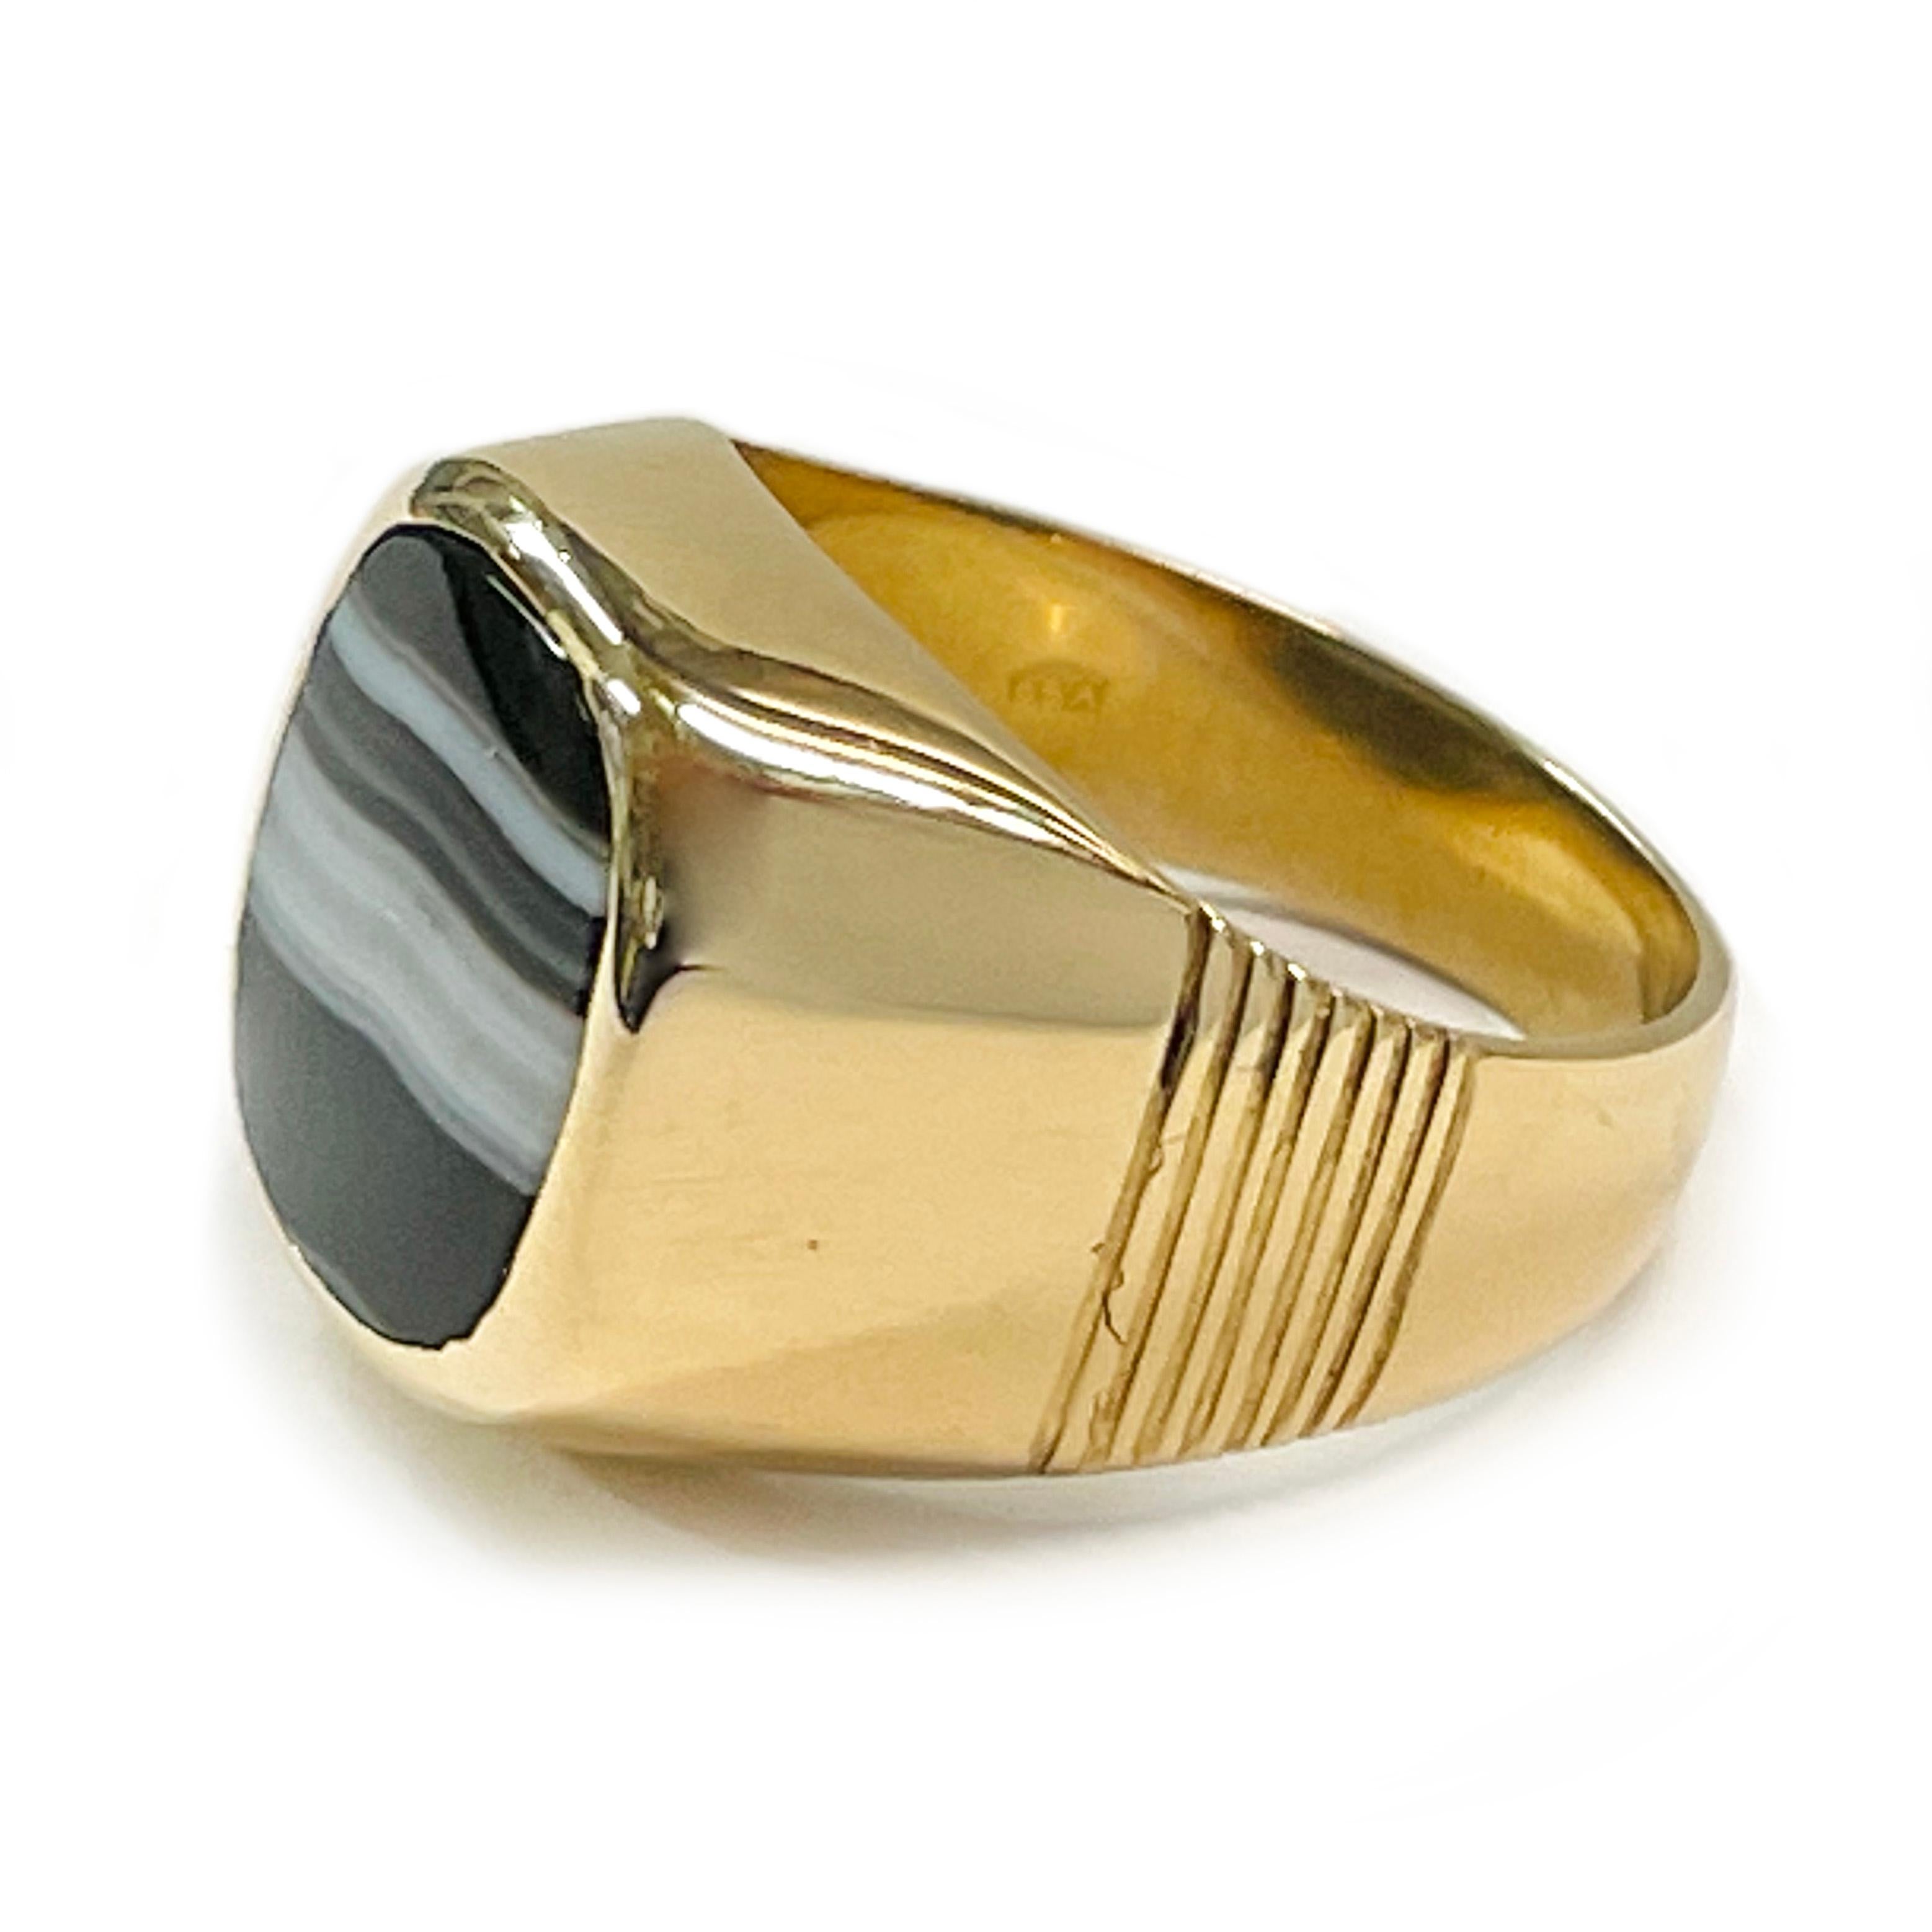 18 Karat Yellow Gold Sardonyx Ring. The wide band ring features a striped white, gray, and black sardonyx rounded rectangular stone. The sardonyx stone measures 13.3mm x 11.5mm. The band has light grooves about mid-way on each side of the tapered